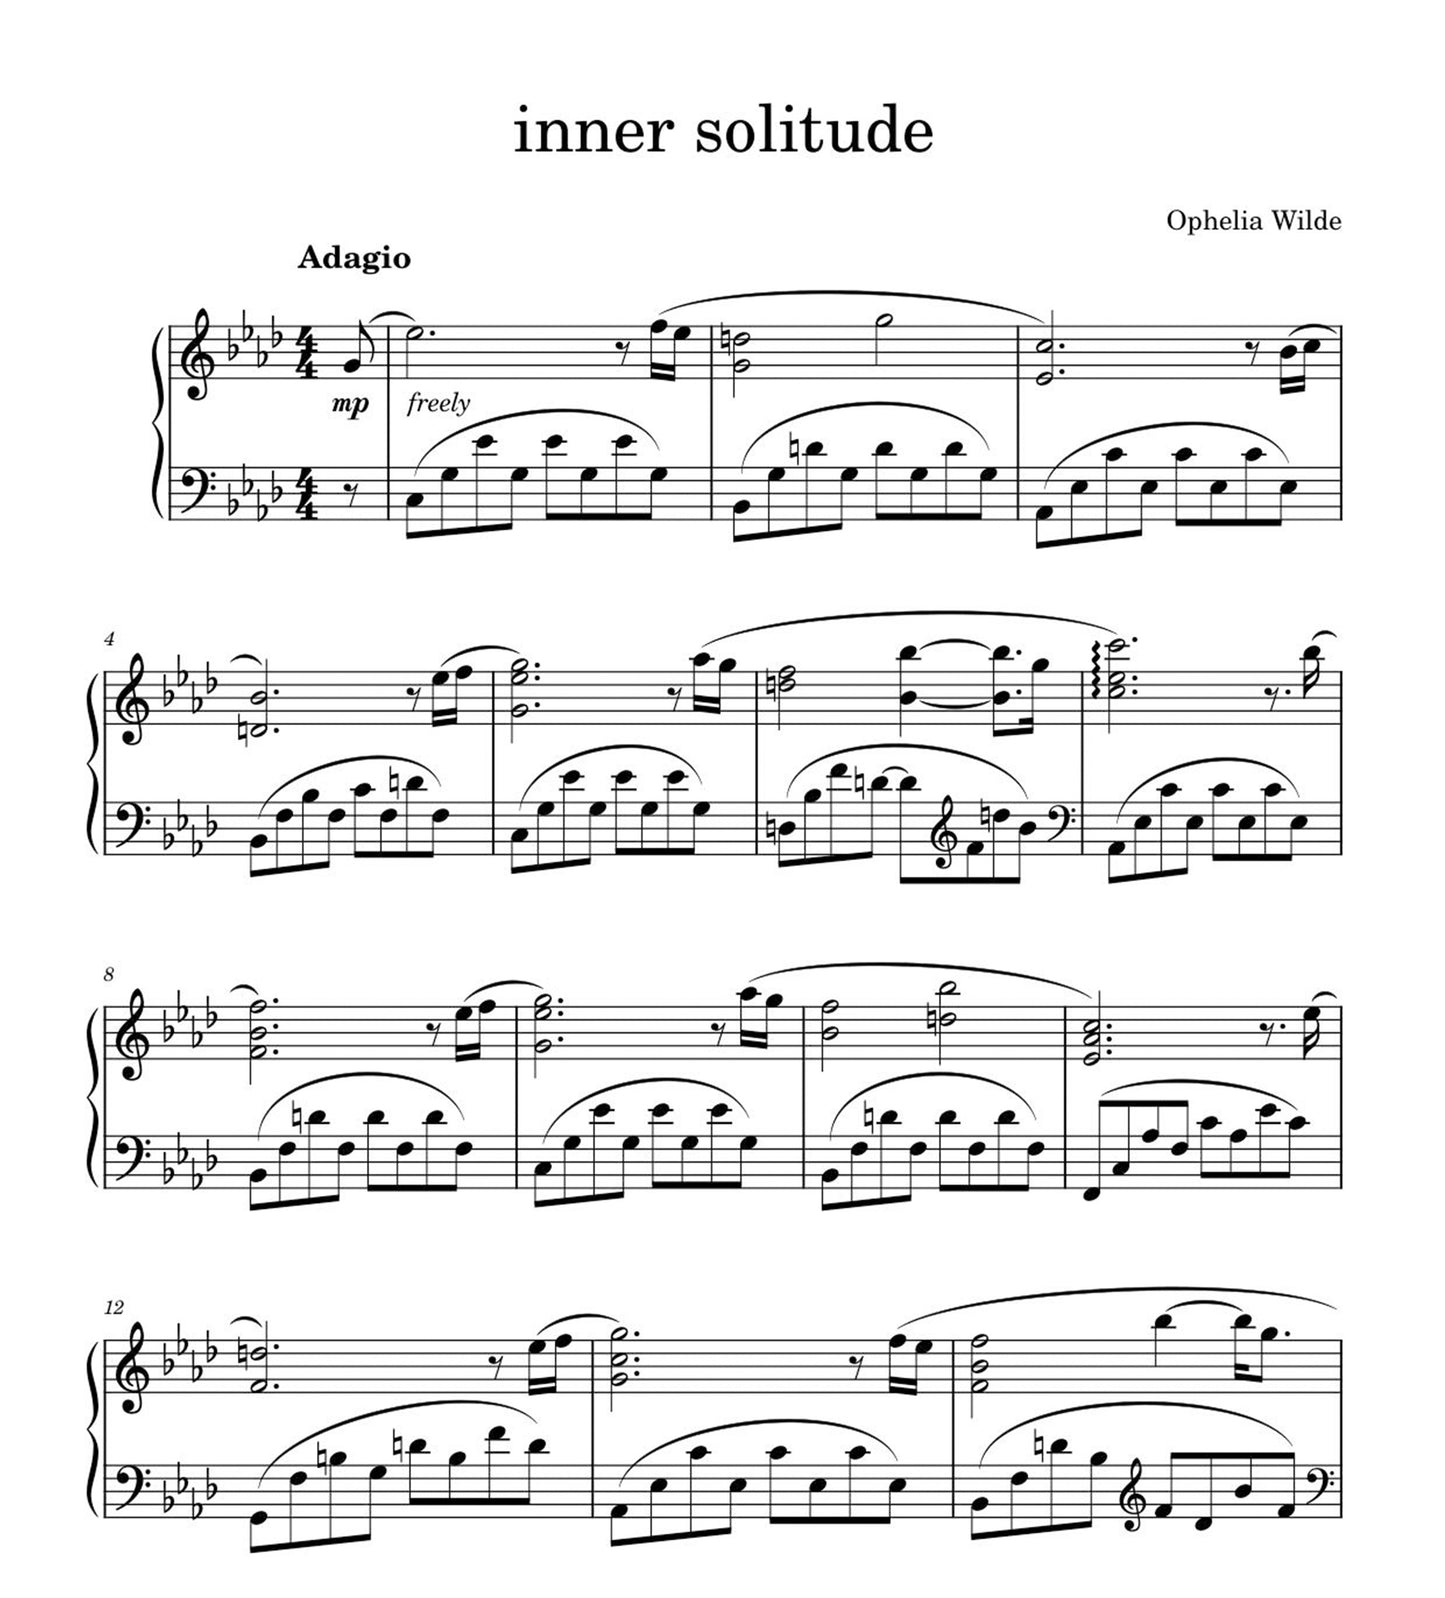 a concert for my soulmate - Complete Album Piano Sheet Music